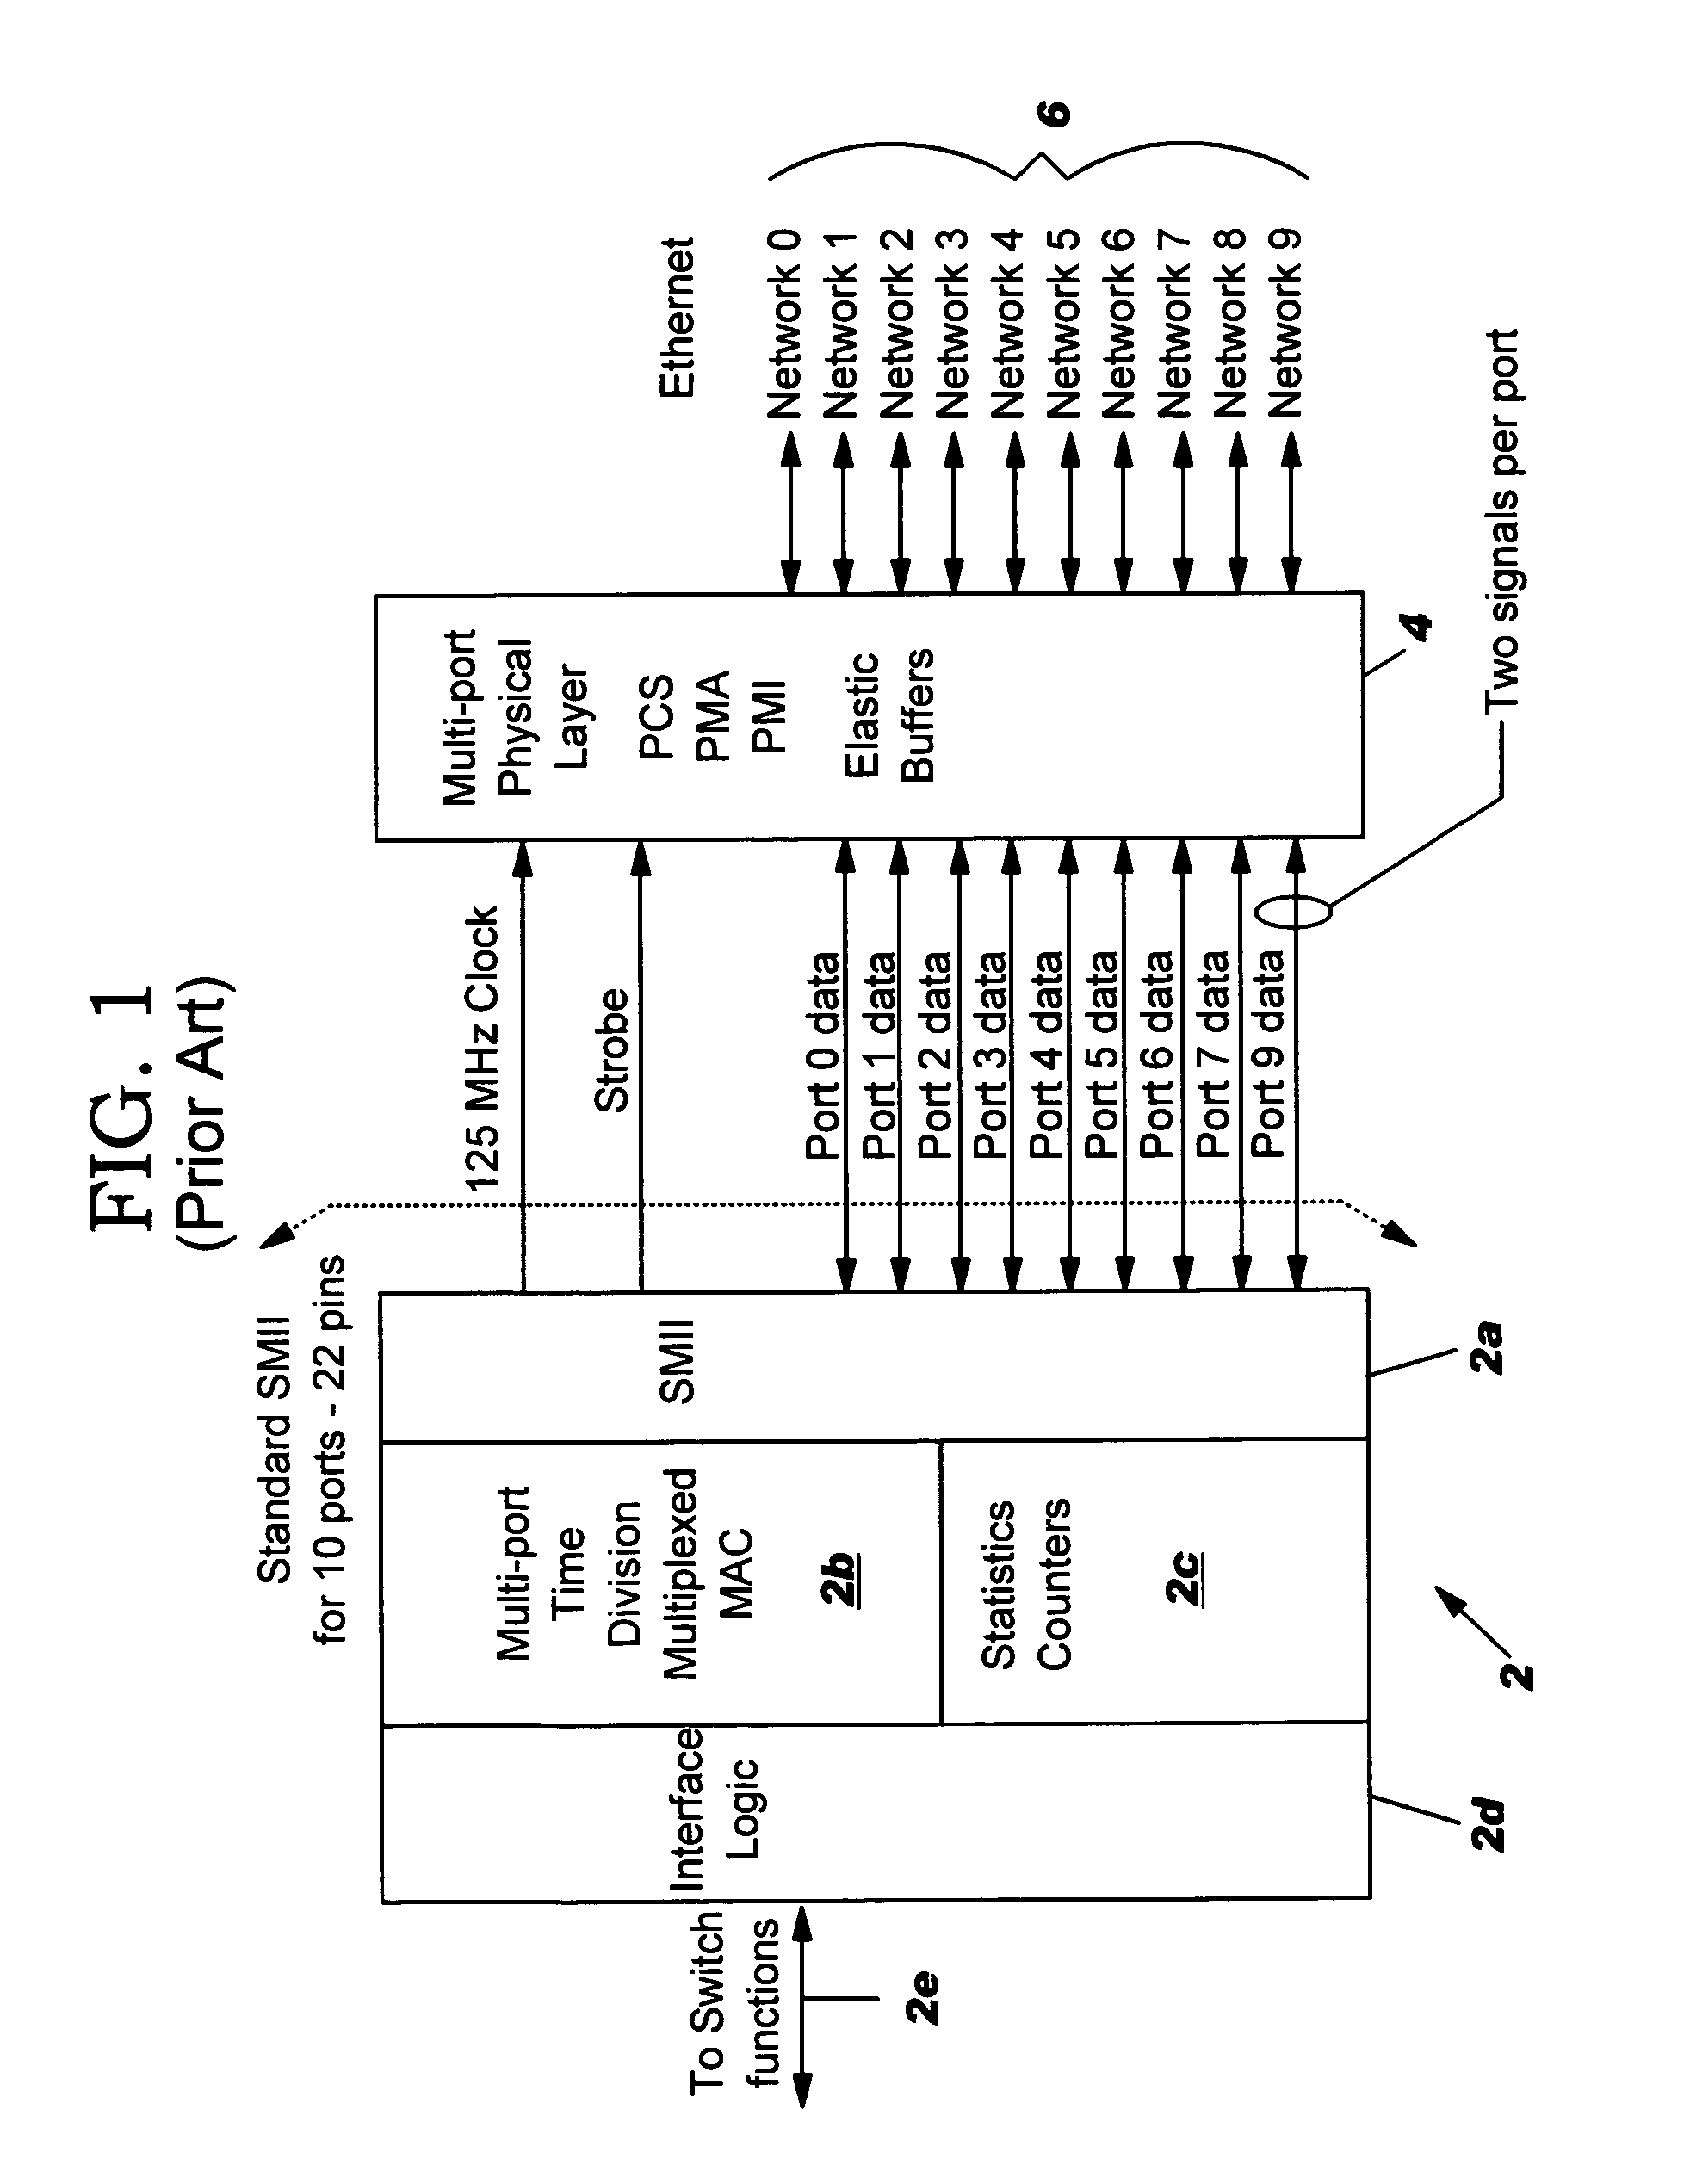 Method and system for fast ethernet serial port multiplexing to reduce I/O pin count